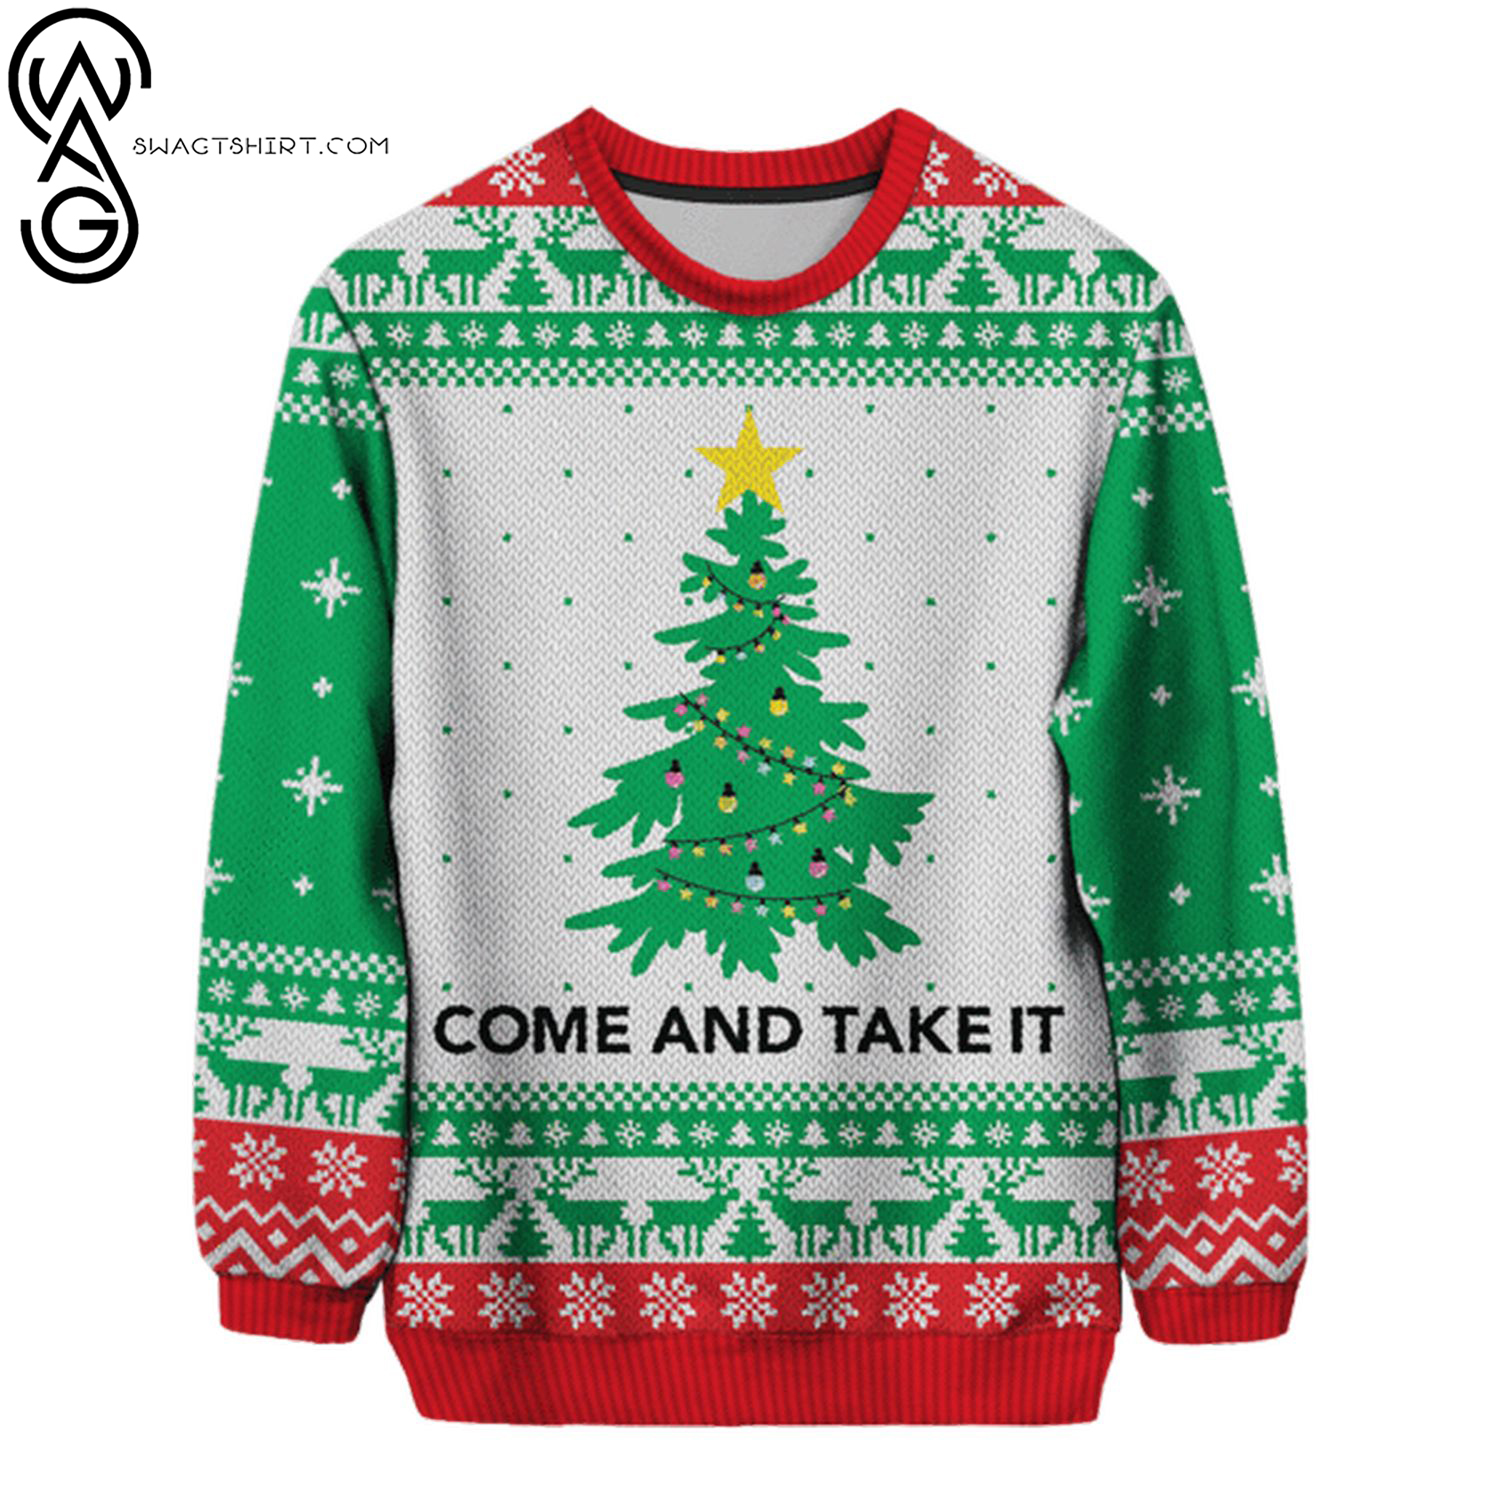 Christmas tree come and get it full printing ugly christmas sweater